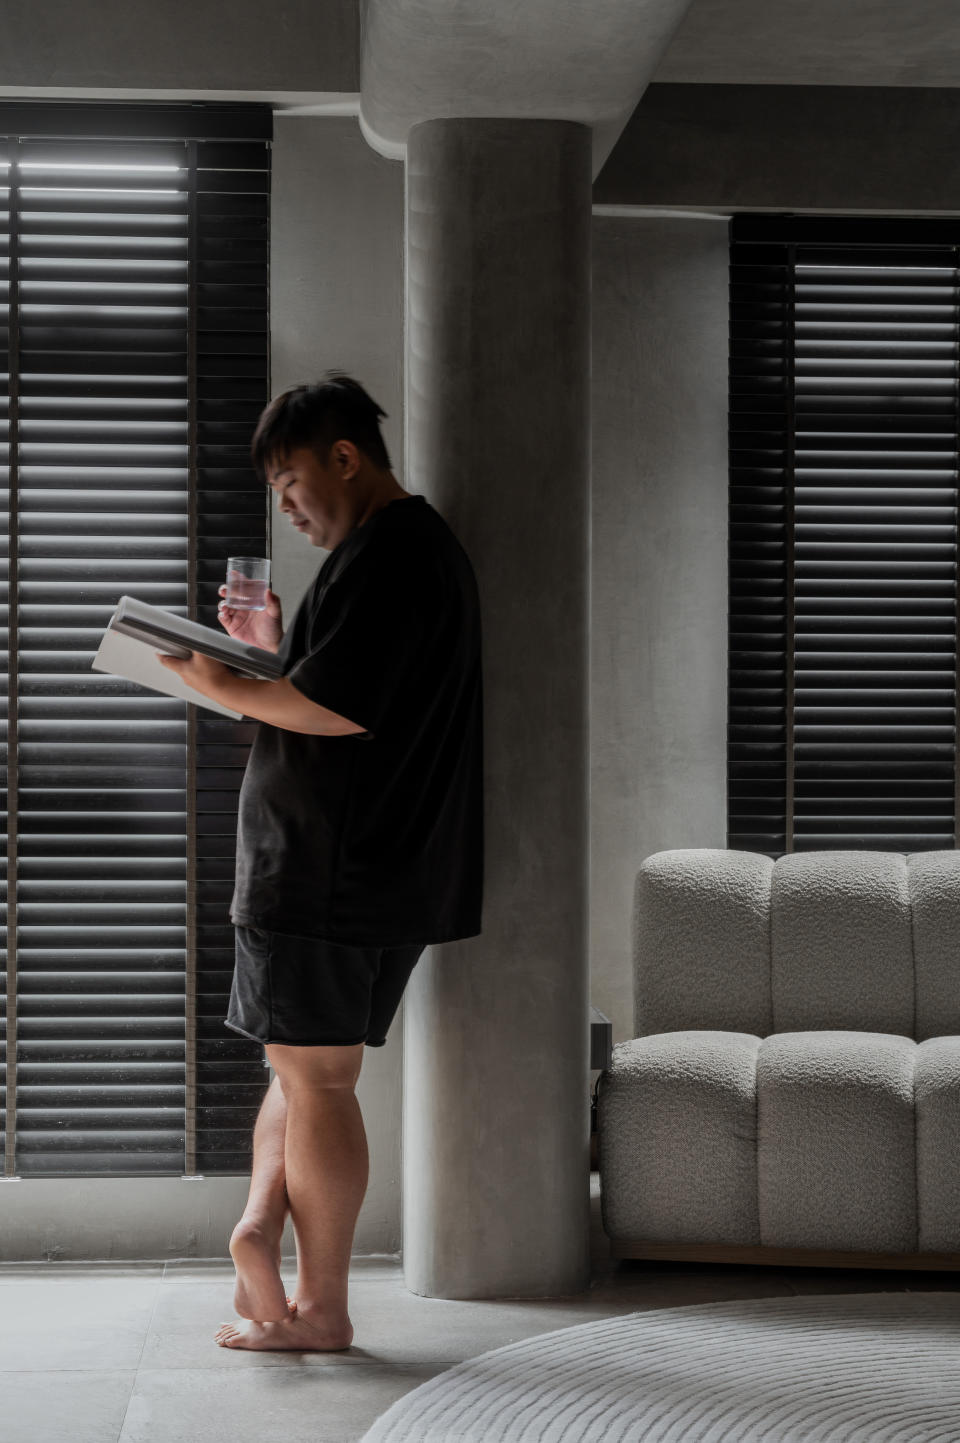 Kelvin Tan, founder of SG Interior KJ and popularly known as comedian Mayiduo, reads his tablet and holds a glass of water while leaning on a column in the living room of his HDB BTO flat.